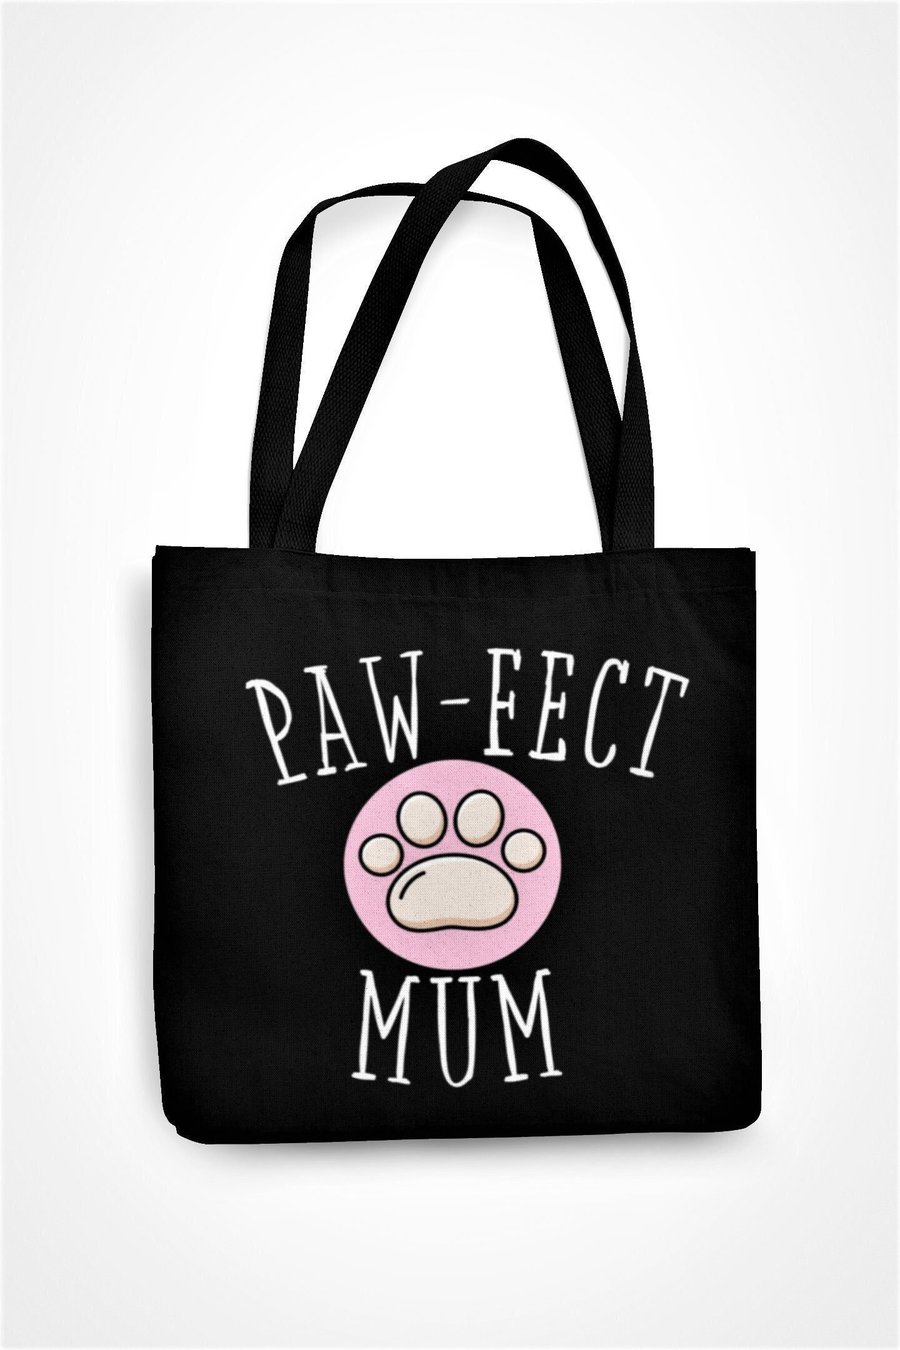 Paw-Fect Mum Tote Bag Mothers Day Birthday Christmas Paw Cat Dog Gift